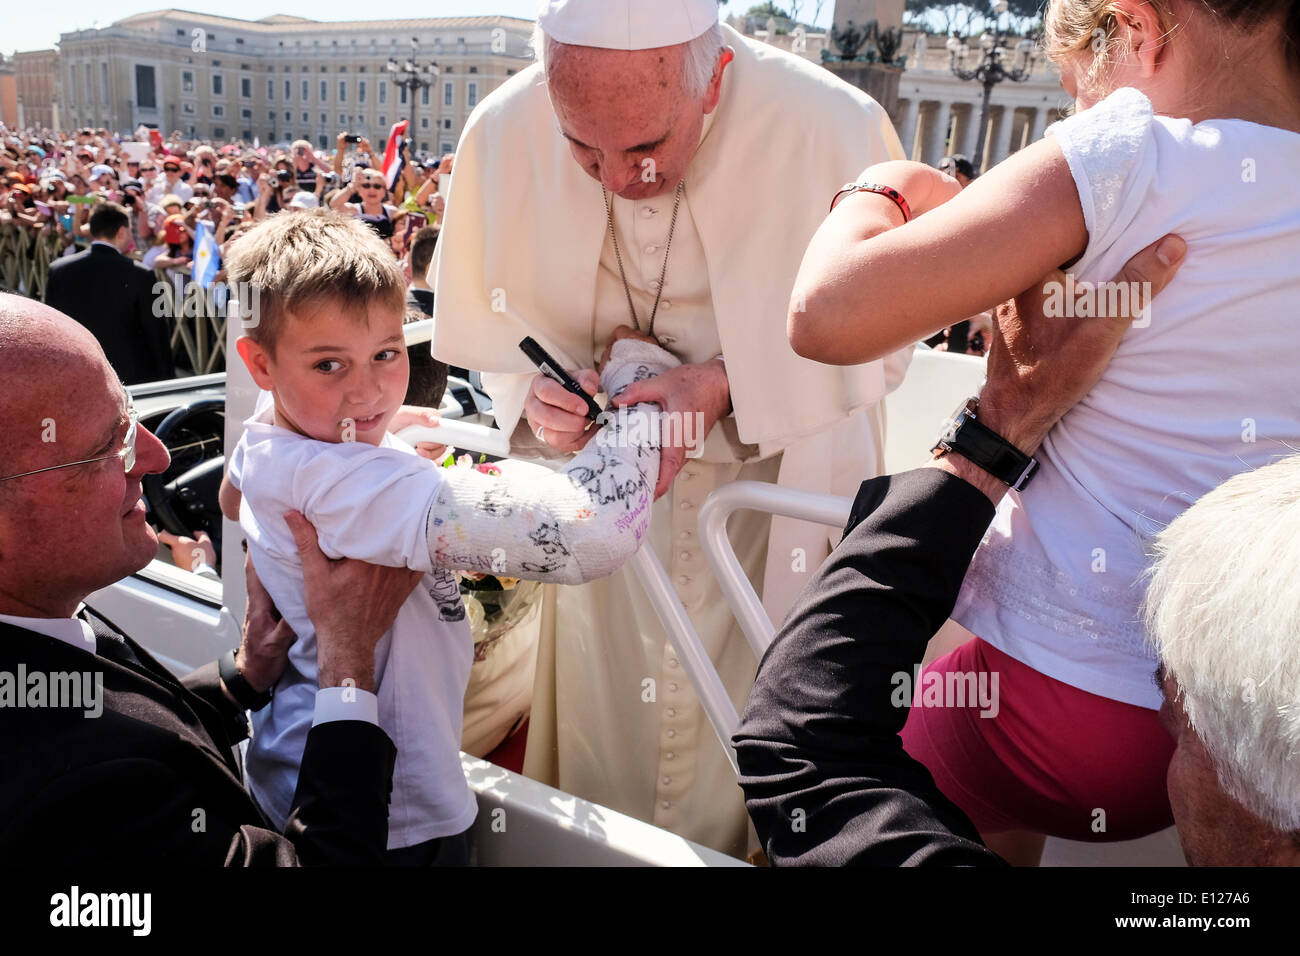 Vatican City. 21st May, 2014. Pope Francis signs the plaster cast of a kid  - General Audience 21 May 2014 Credit: Realy Easy Star/Alamy Live News  Stock Photo - Alamy